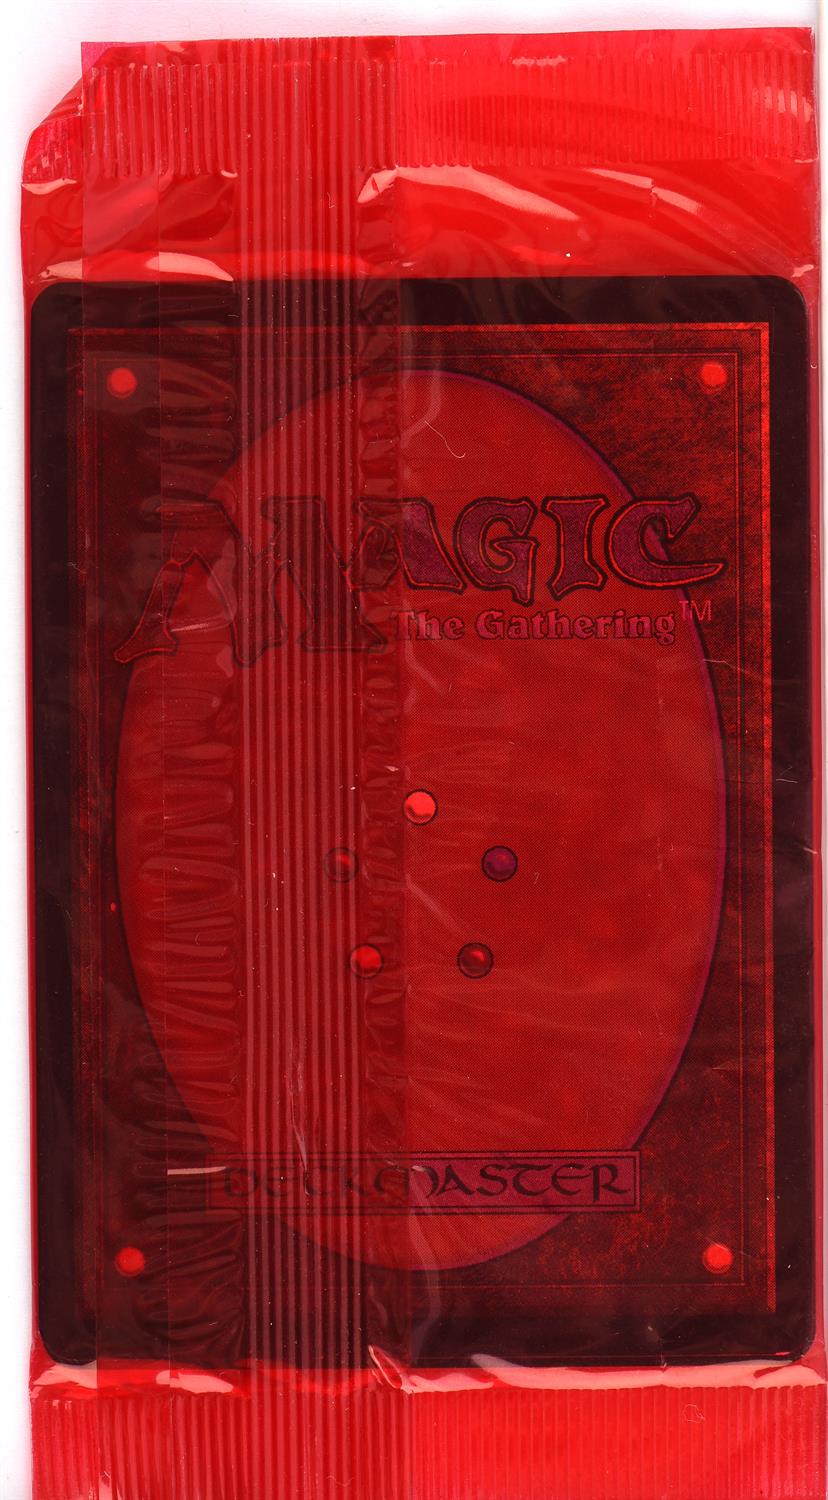 Magic the Gathering TCG. Sealed Euro Lands red pack, this pack features basic land cards based on - Image 2 of 2